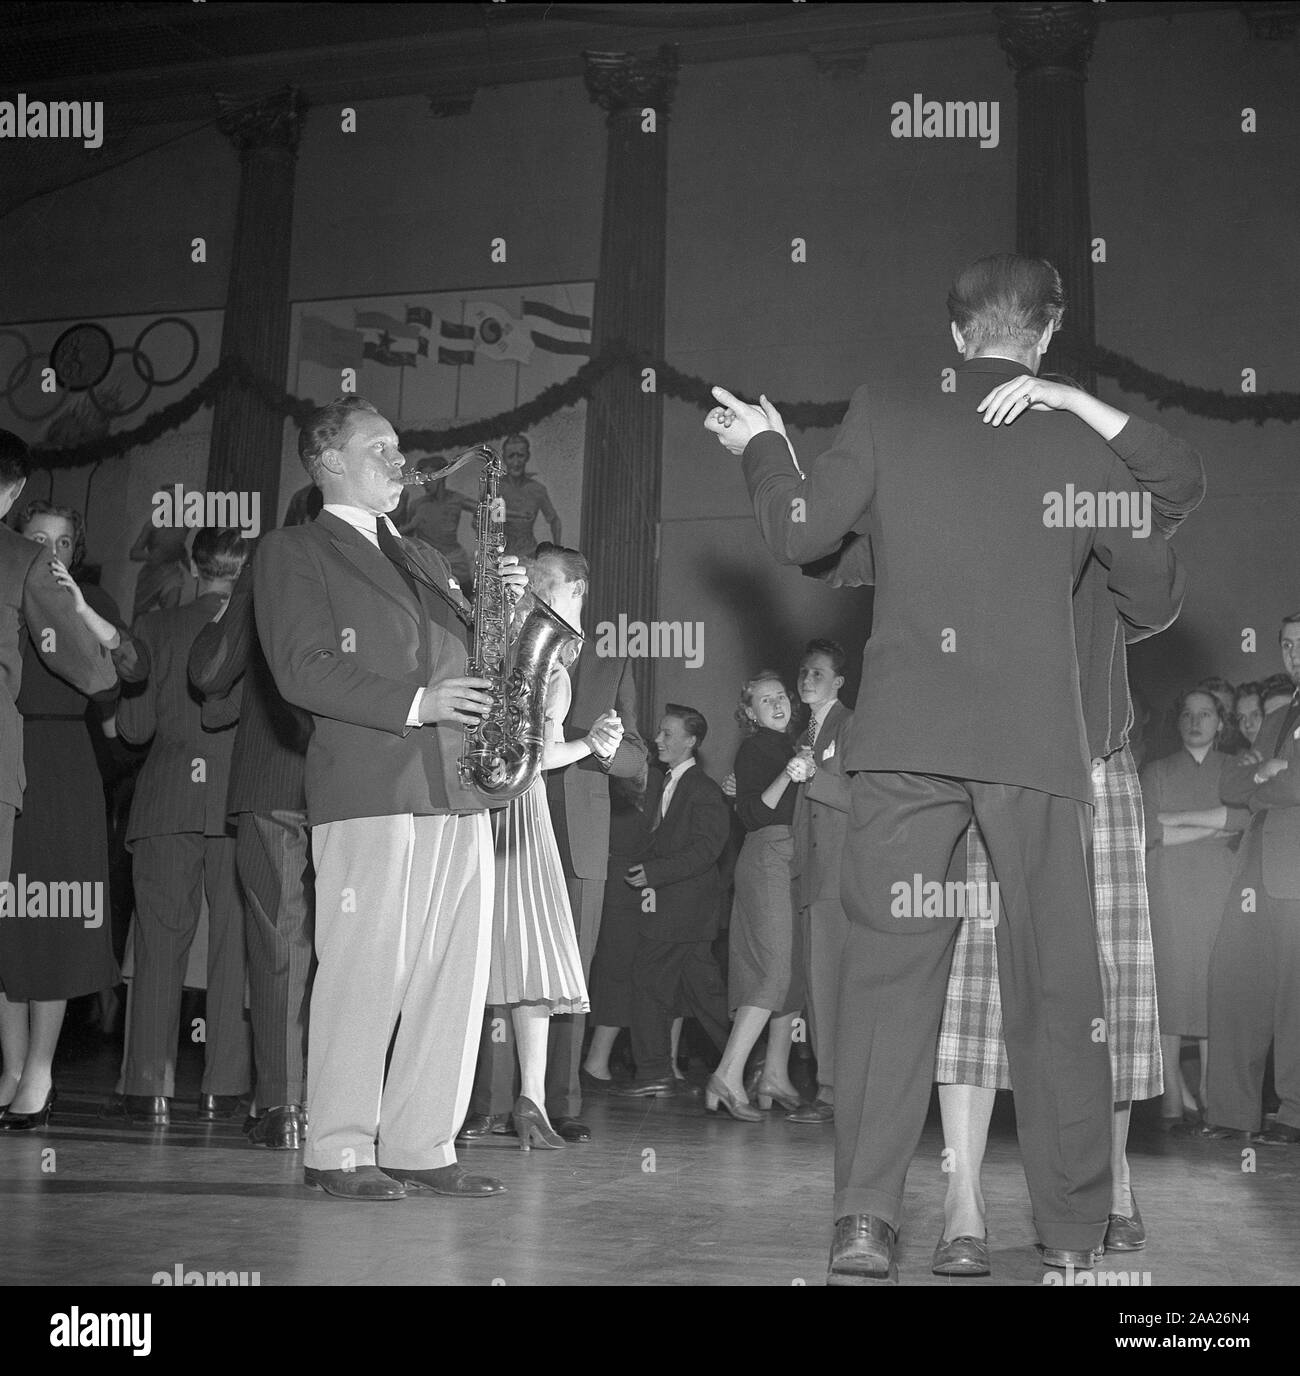 Dancing in the 1950s. The dance floor is filled with dancing couples moving to the music. A saxophonist is standing amongst them playing.  Sweden 1951. Ref 1871 Stock Photo